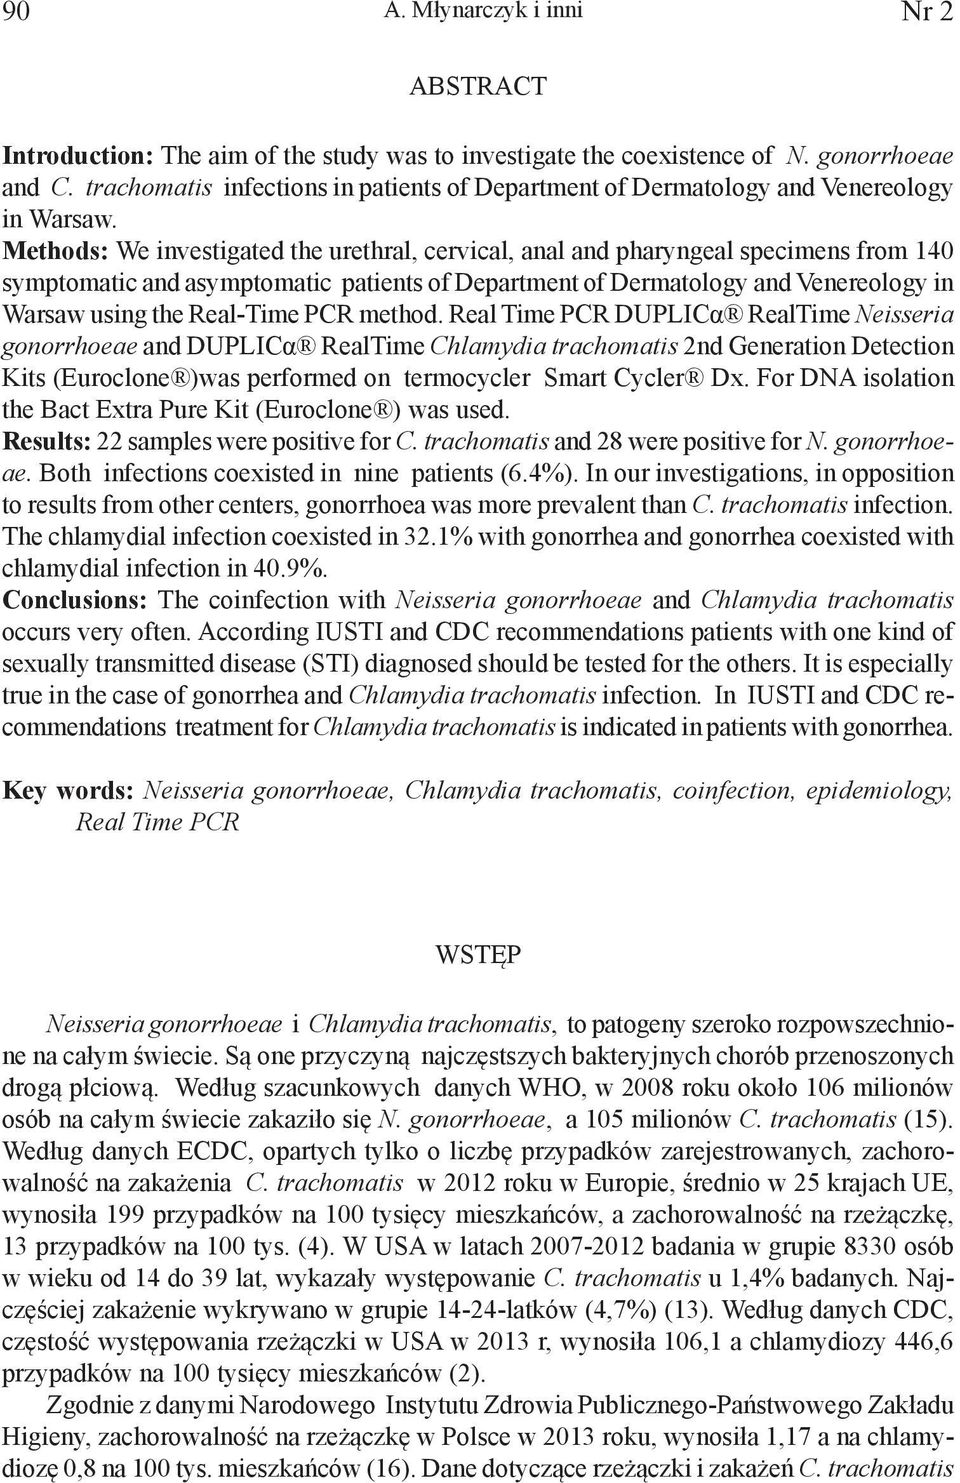 Methods: We investigated the urethral, cervical, anal and pharyngeal specimens from 140 symptomatic and asymptomatic patients of Department of Dermatology and Venereology in Warsaw using the